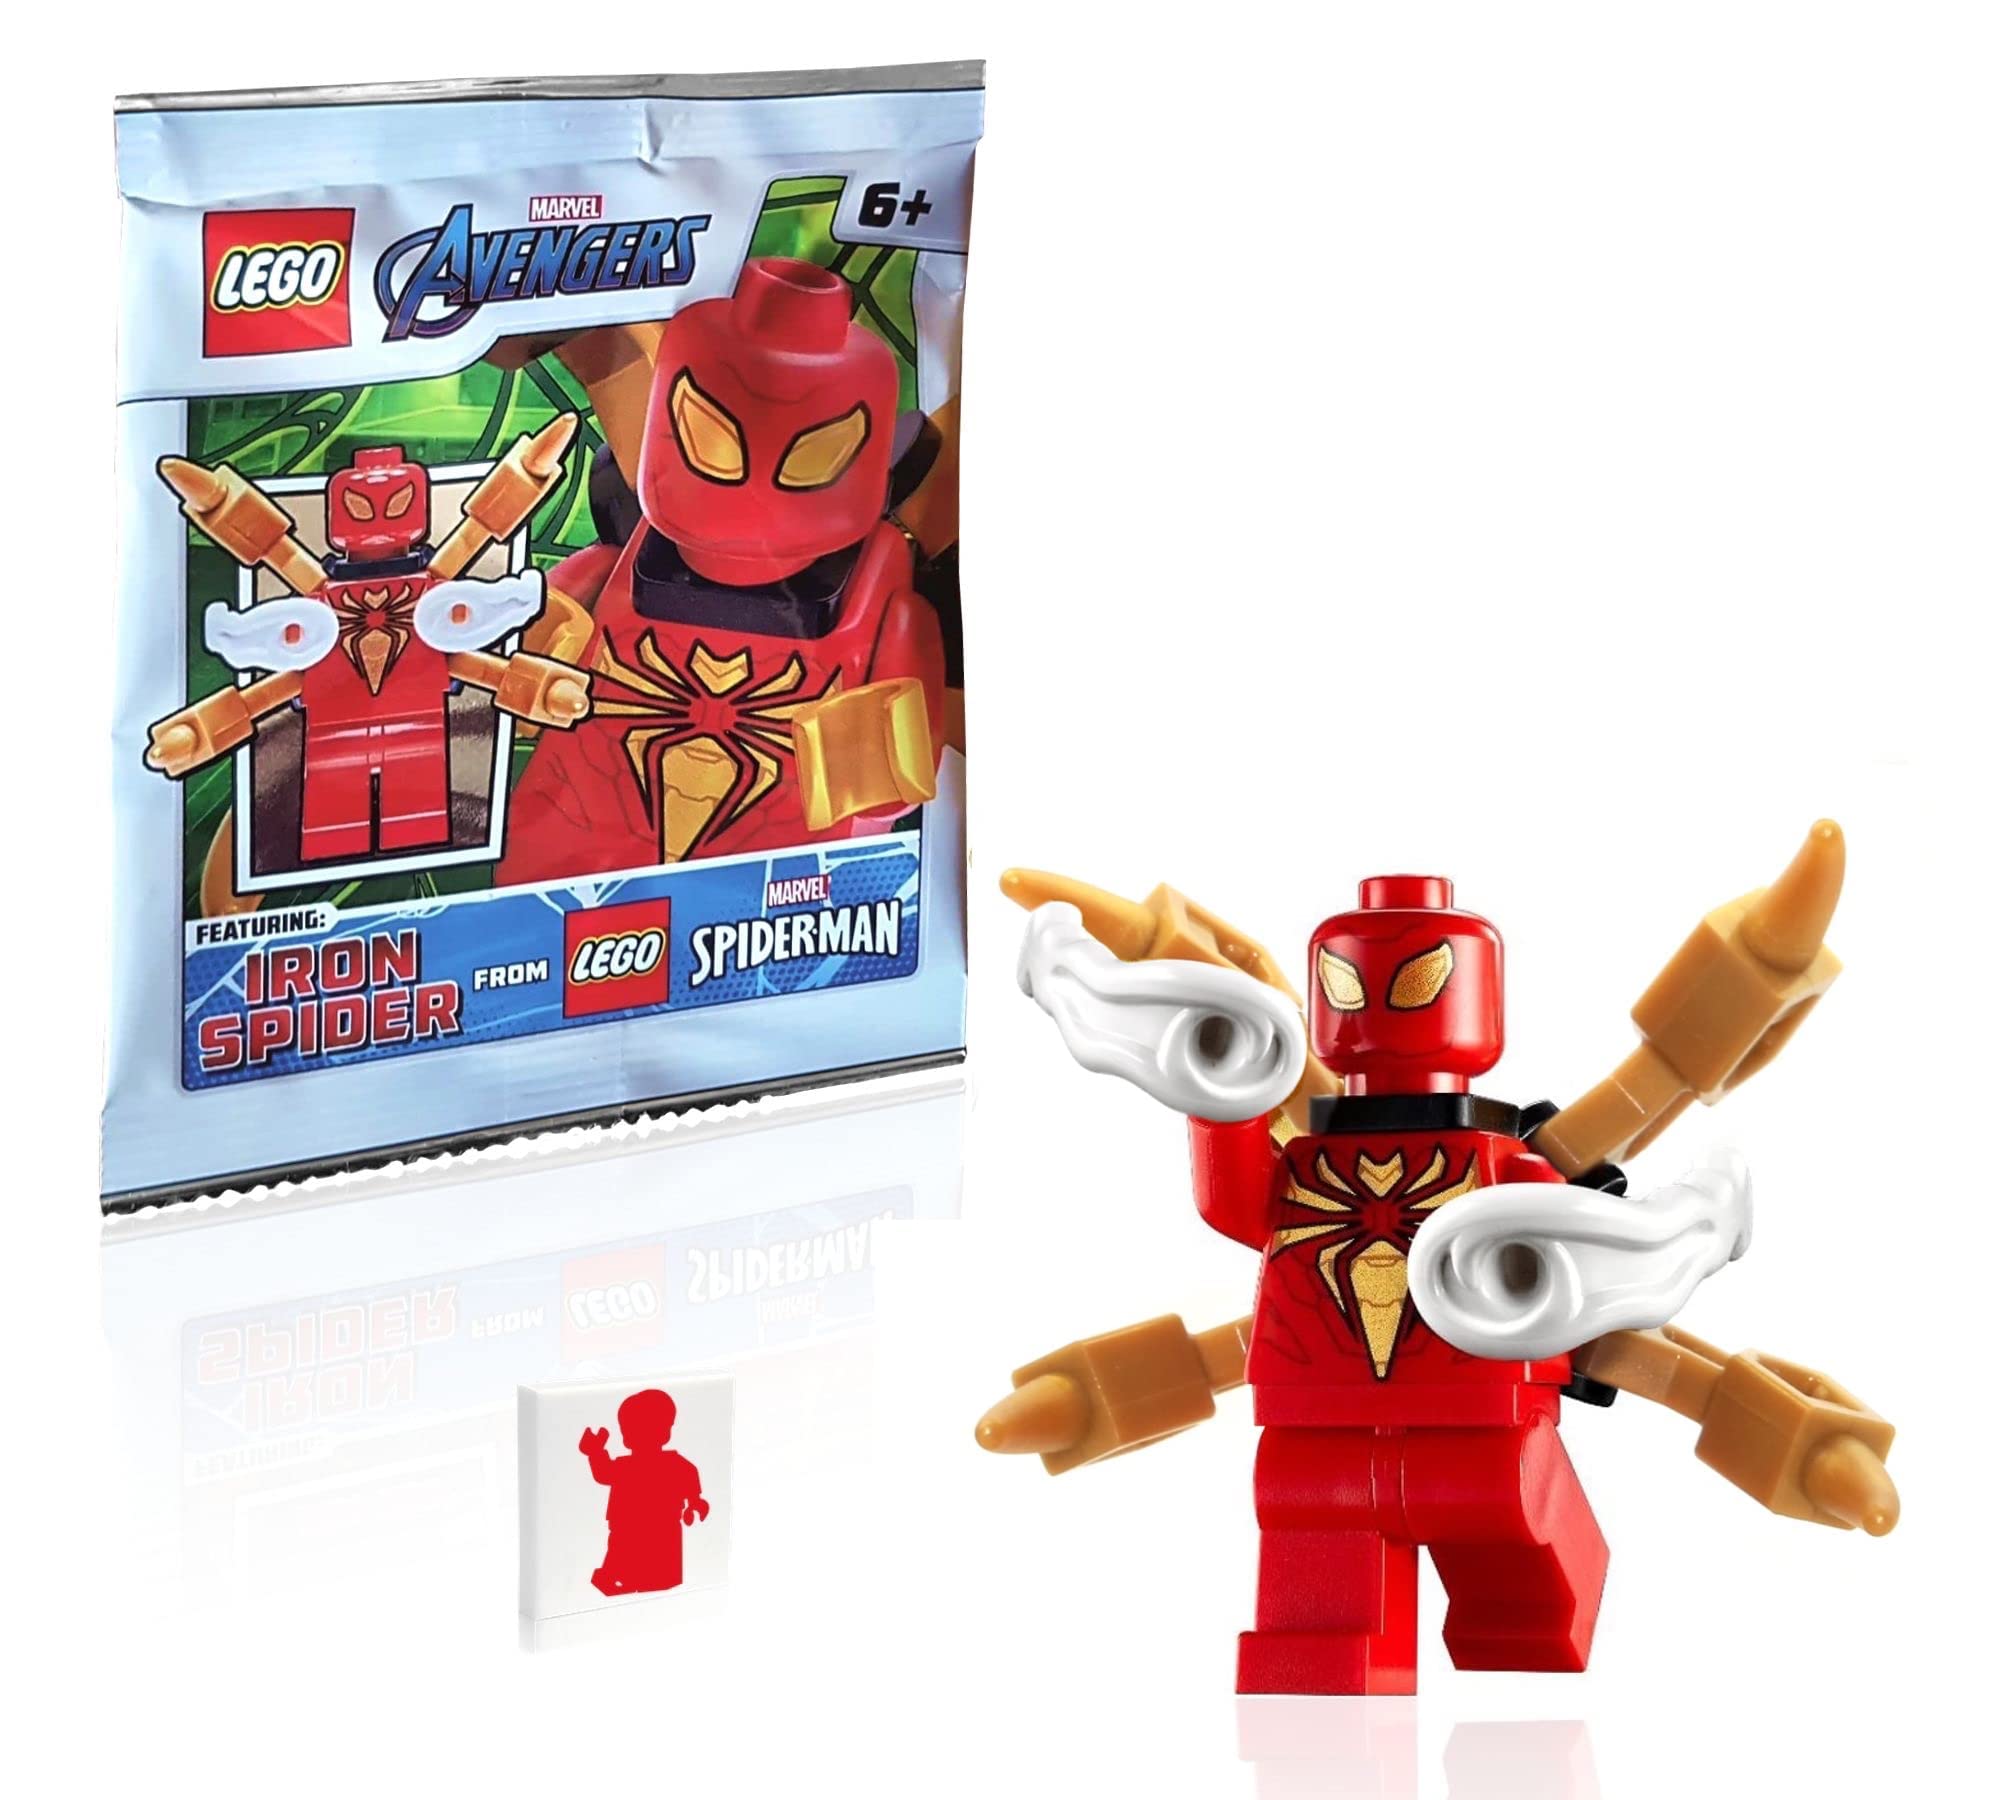 LEGO Marvel Super Heroes Spider-Man Minifigure - Iron Spider Armor (with Mechanical Arms and Power Blasts)